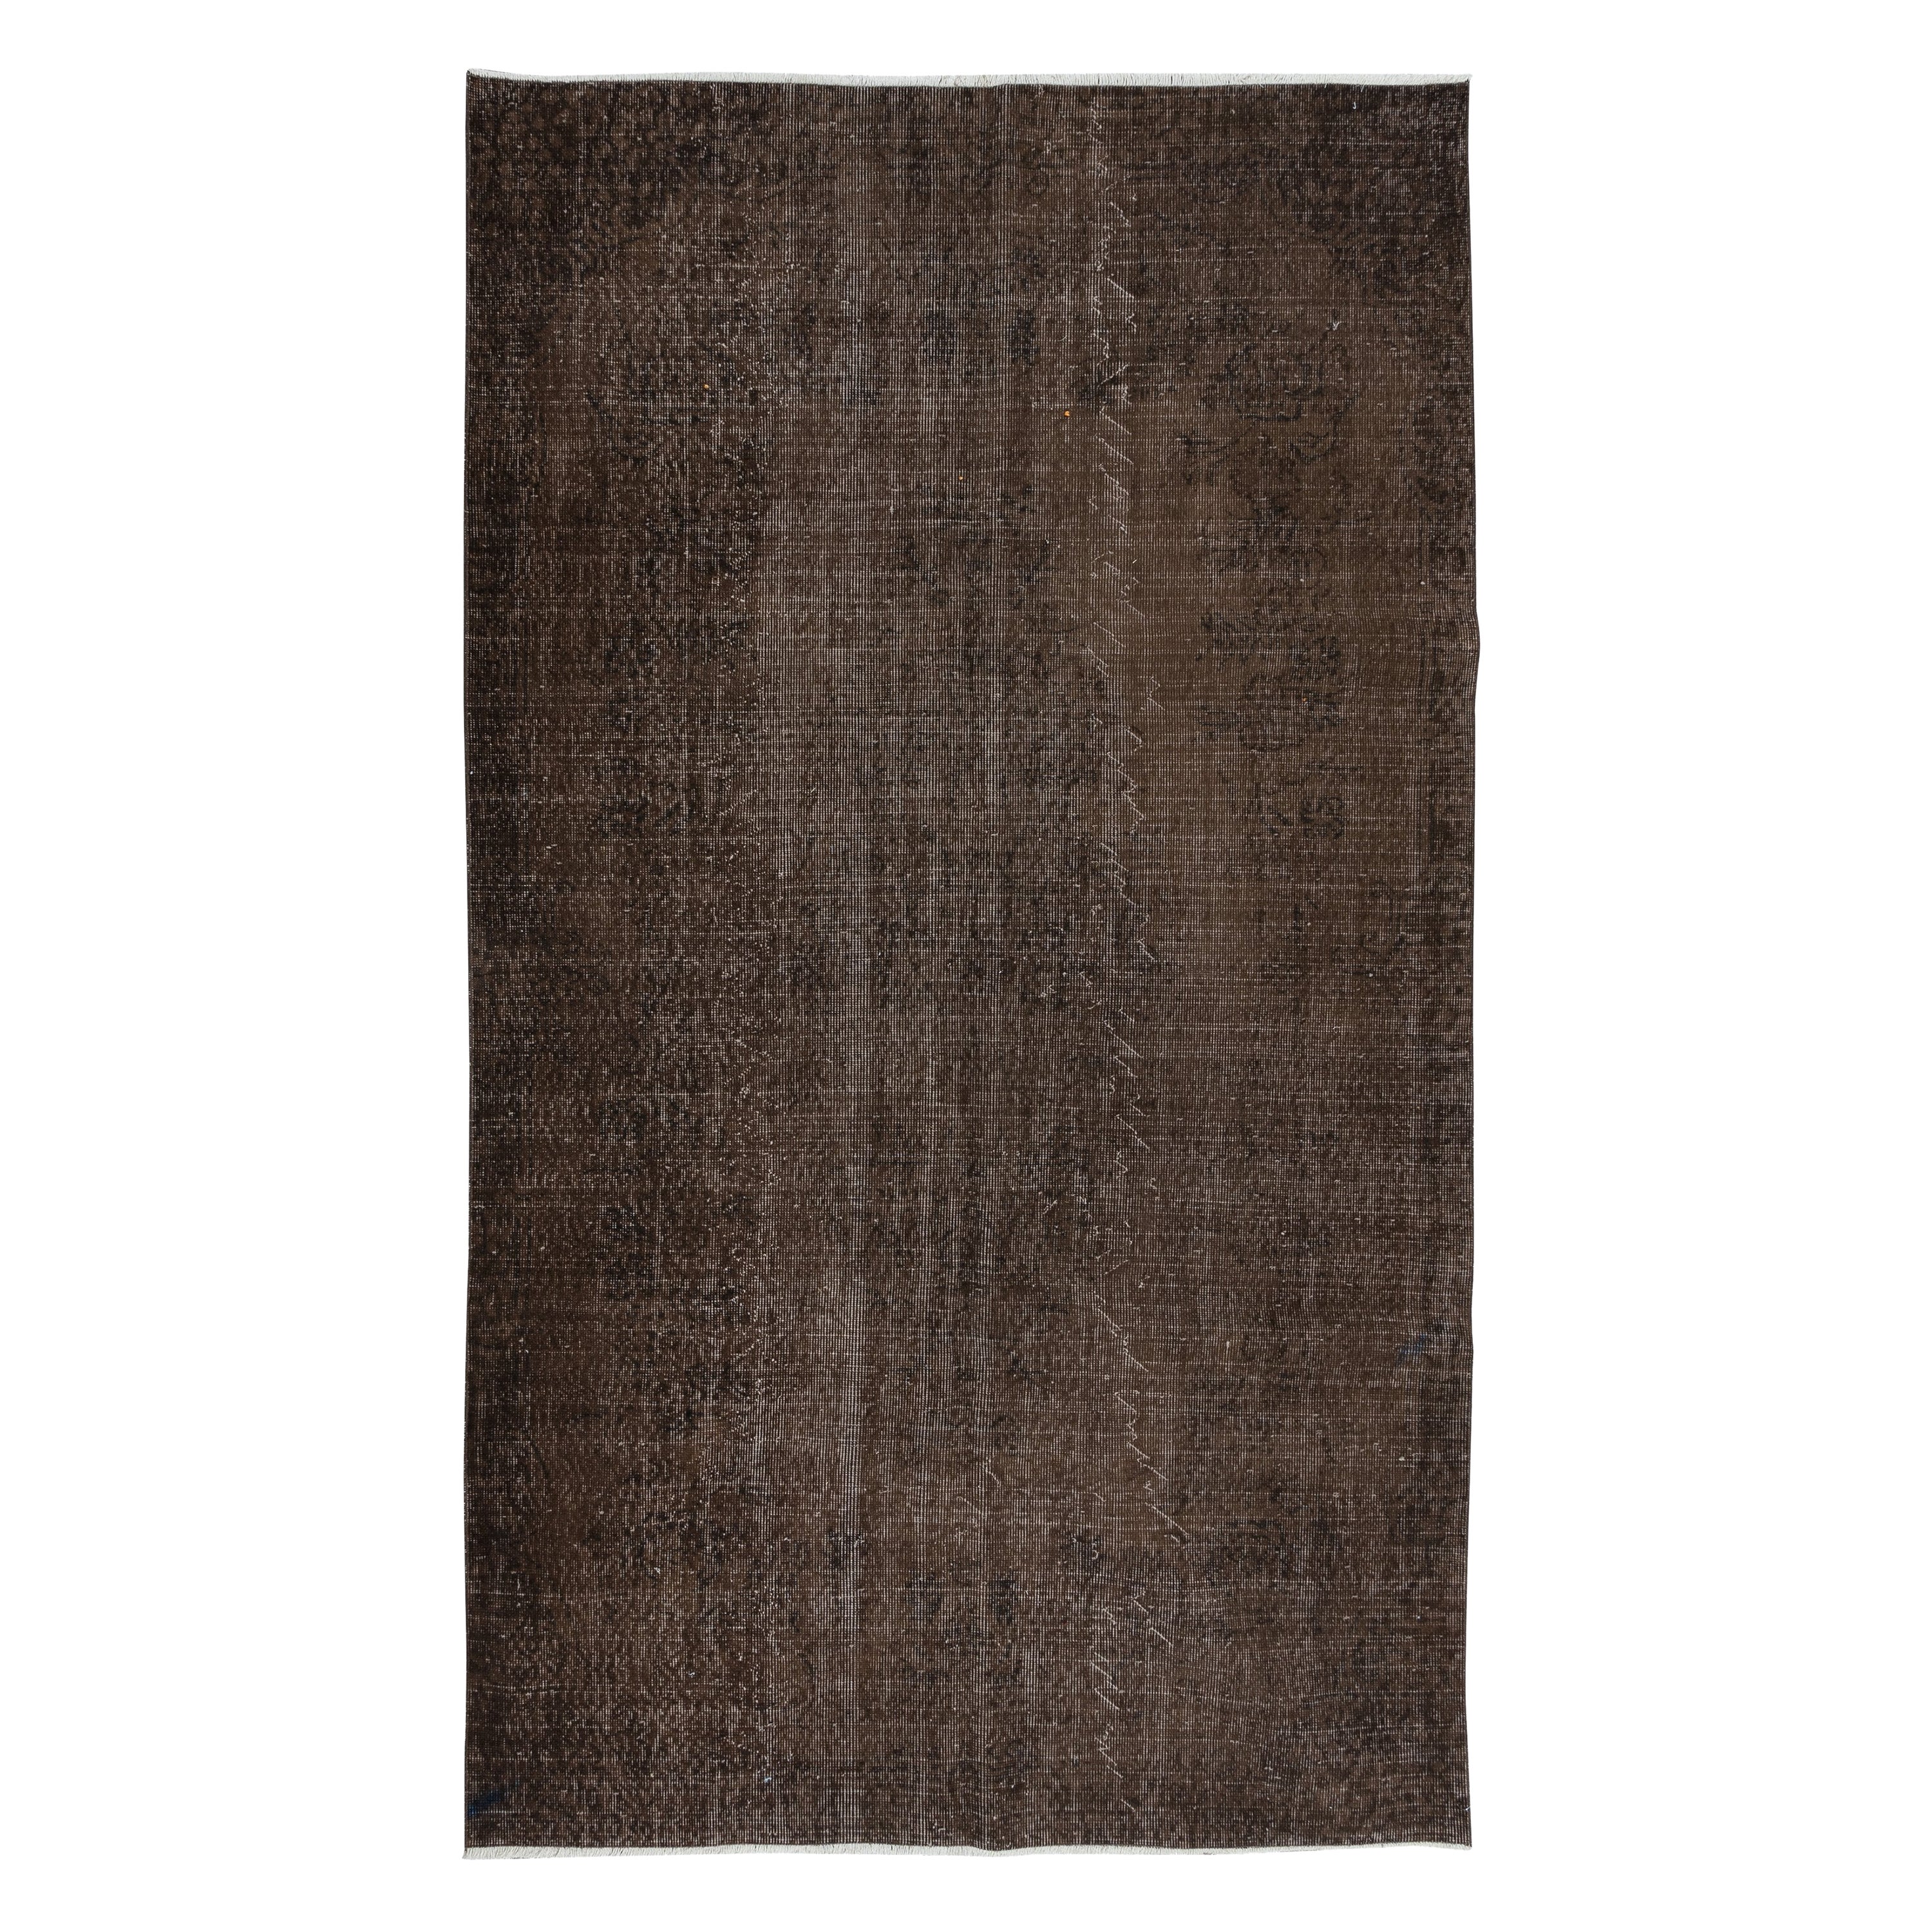 5.4x9.5 Ft Decorative Vintage Rug in Brown, Handwoven and Handknotted in Turkey For Sale